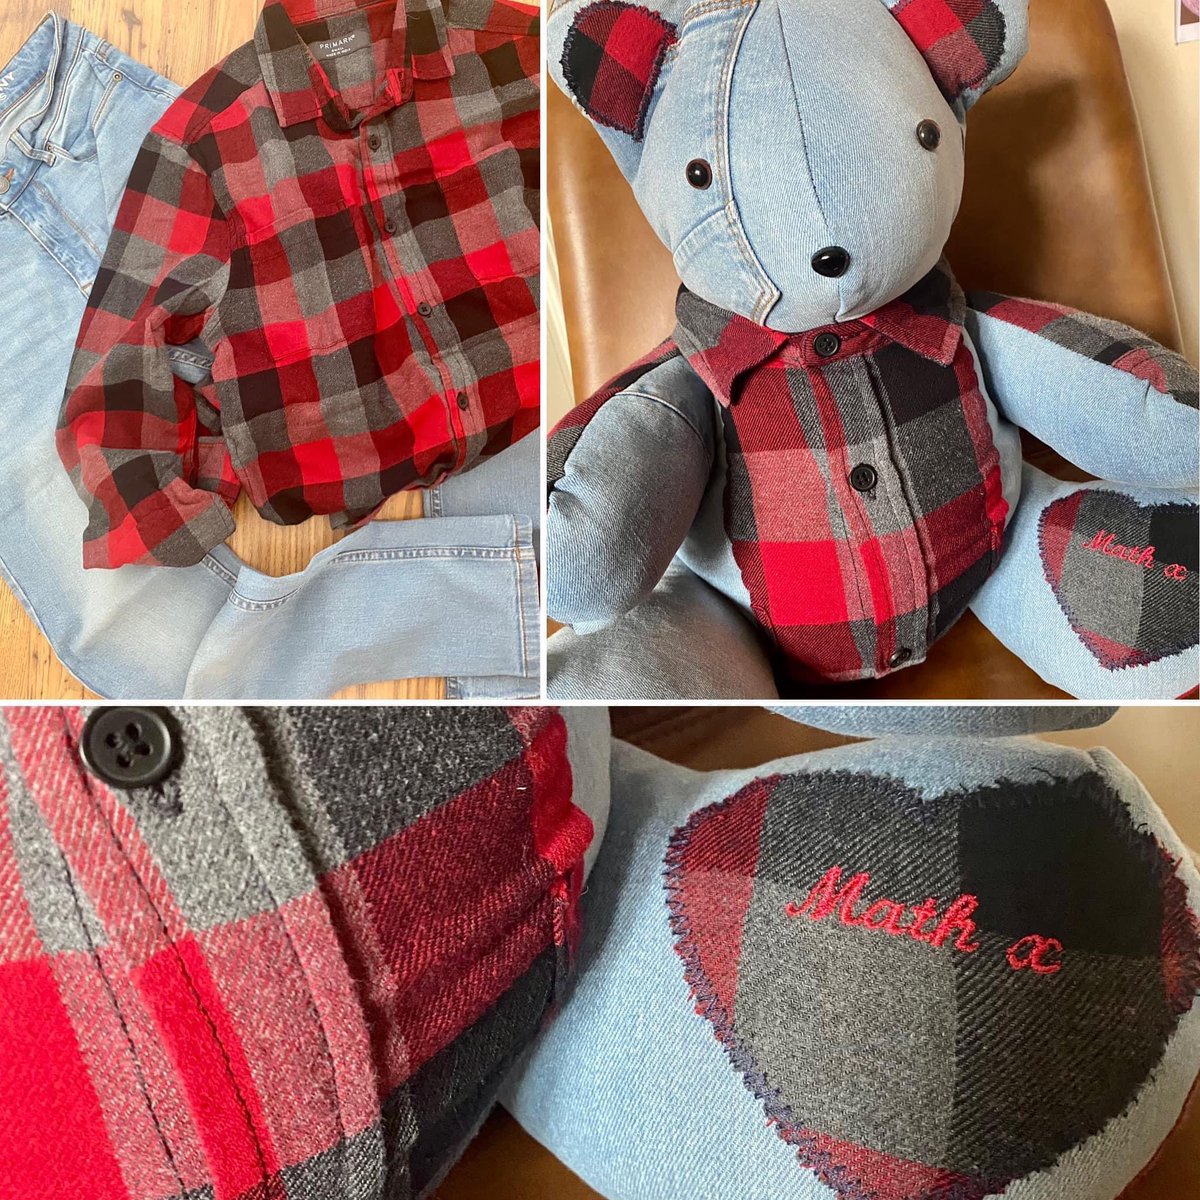 A pair of jeans and shirt that mean so much, into a memory bear to keep forever ❤️ #earlybiz #UKGiftAM #ukmakers #handmade #love